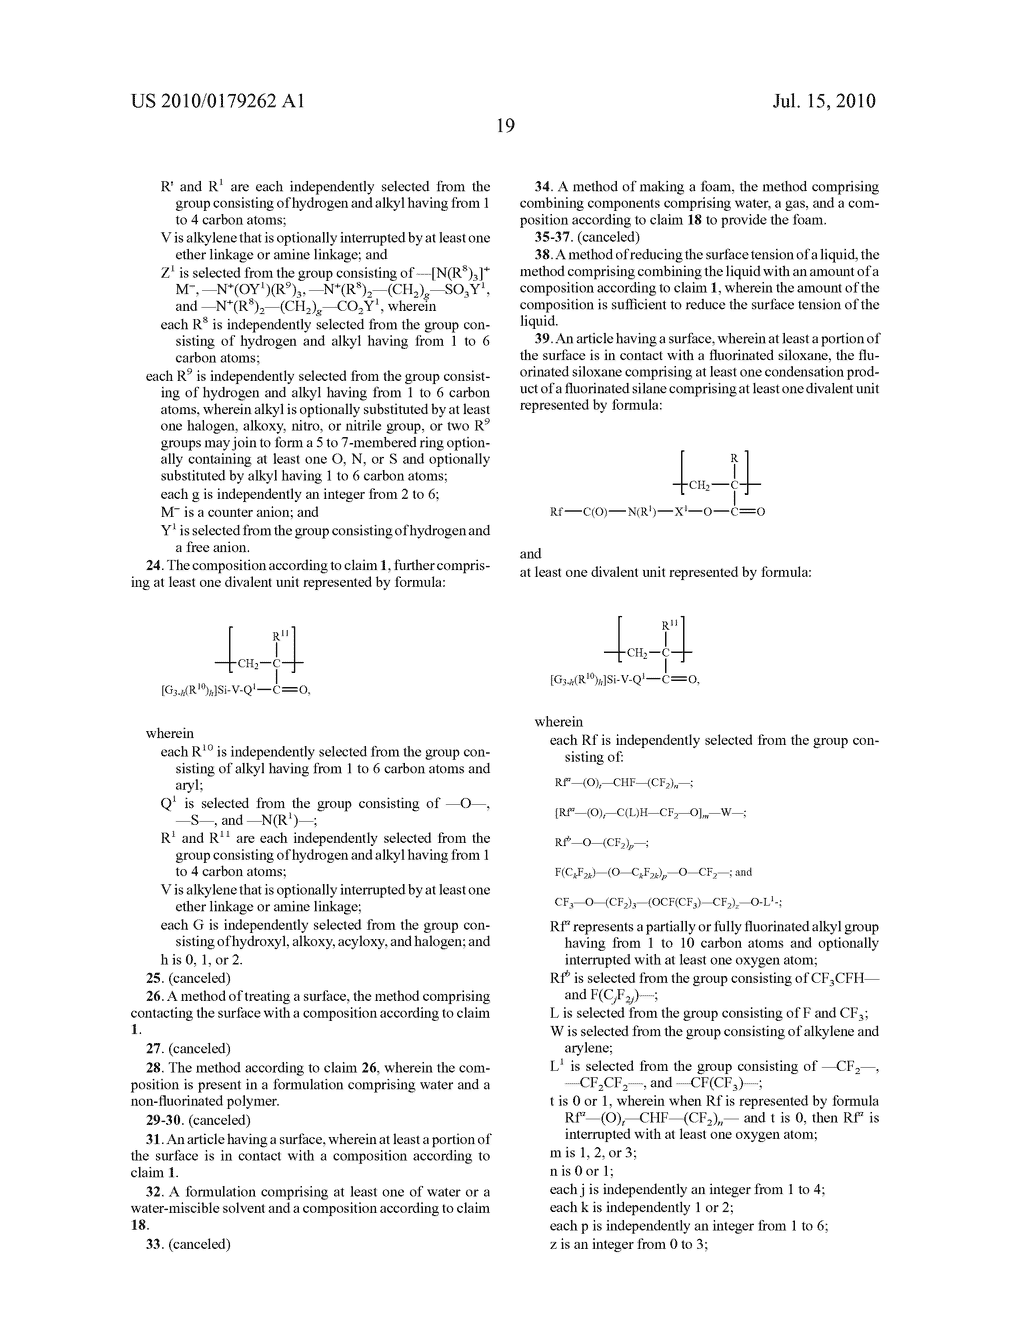 FLUORINATED ETHER COMPOSITIONS AND METHODS OF USING THE SAME - diagram, schematic, and image 20